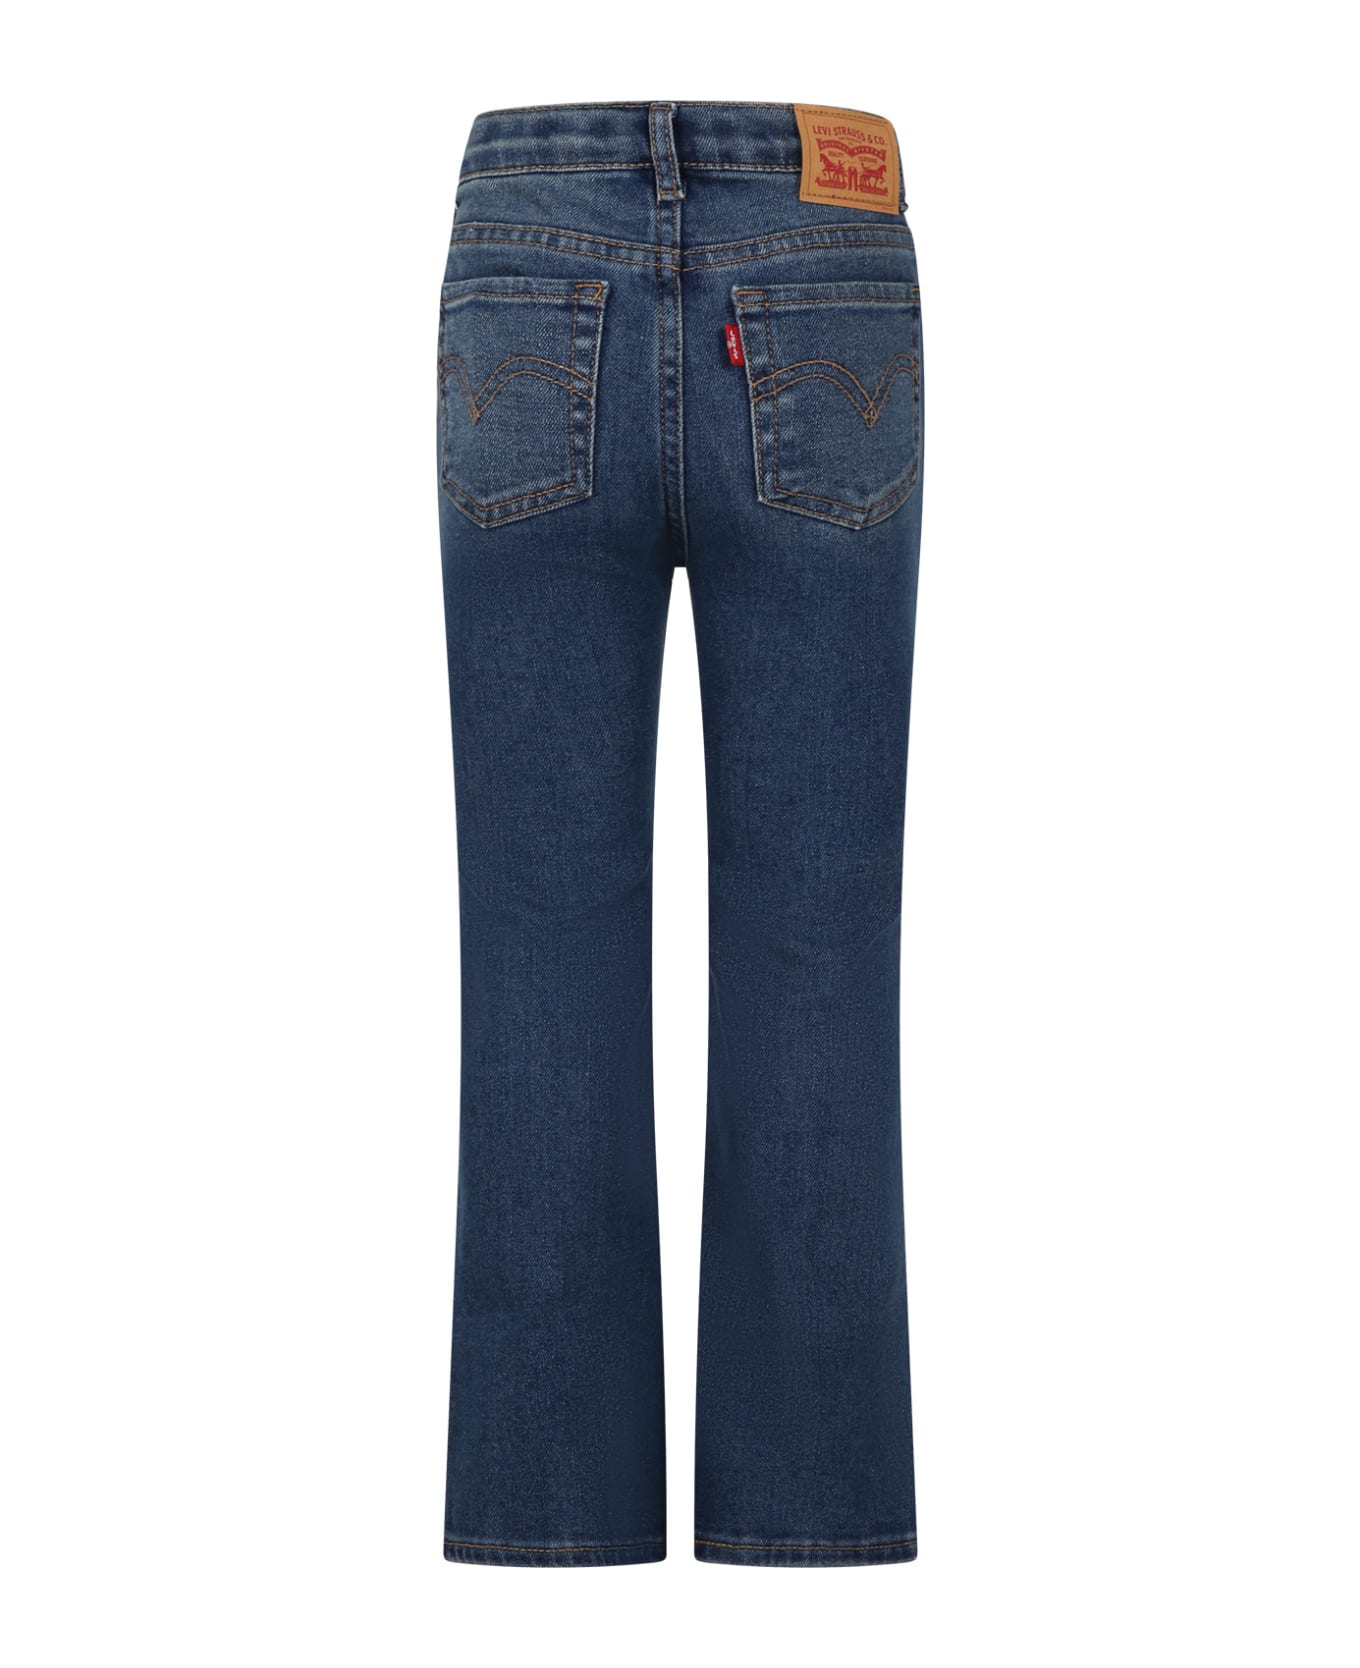 Levi's Denim Jeans For Girl With Logo Patch - Denim ボトムス